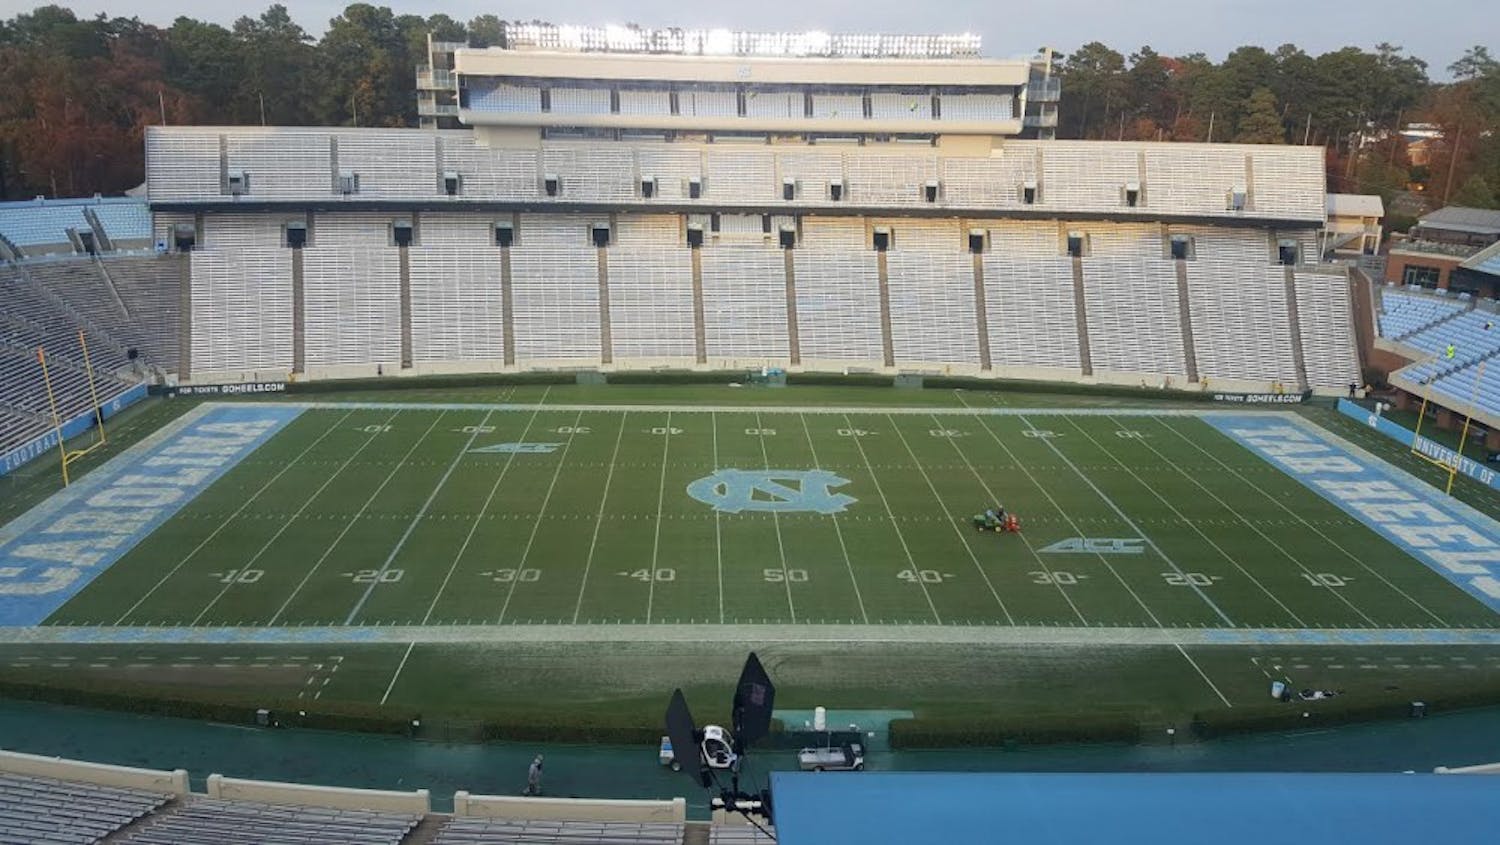 Kenan Stadium will not be switching to a turf field but will instead keep the current grass surface.